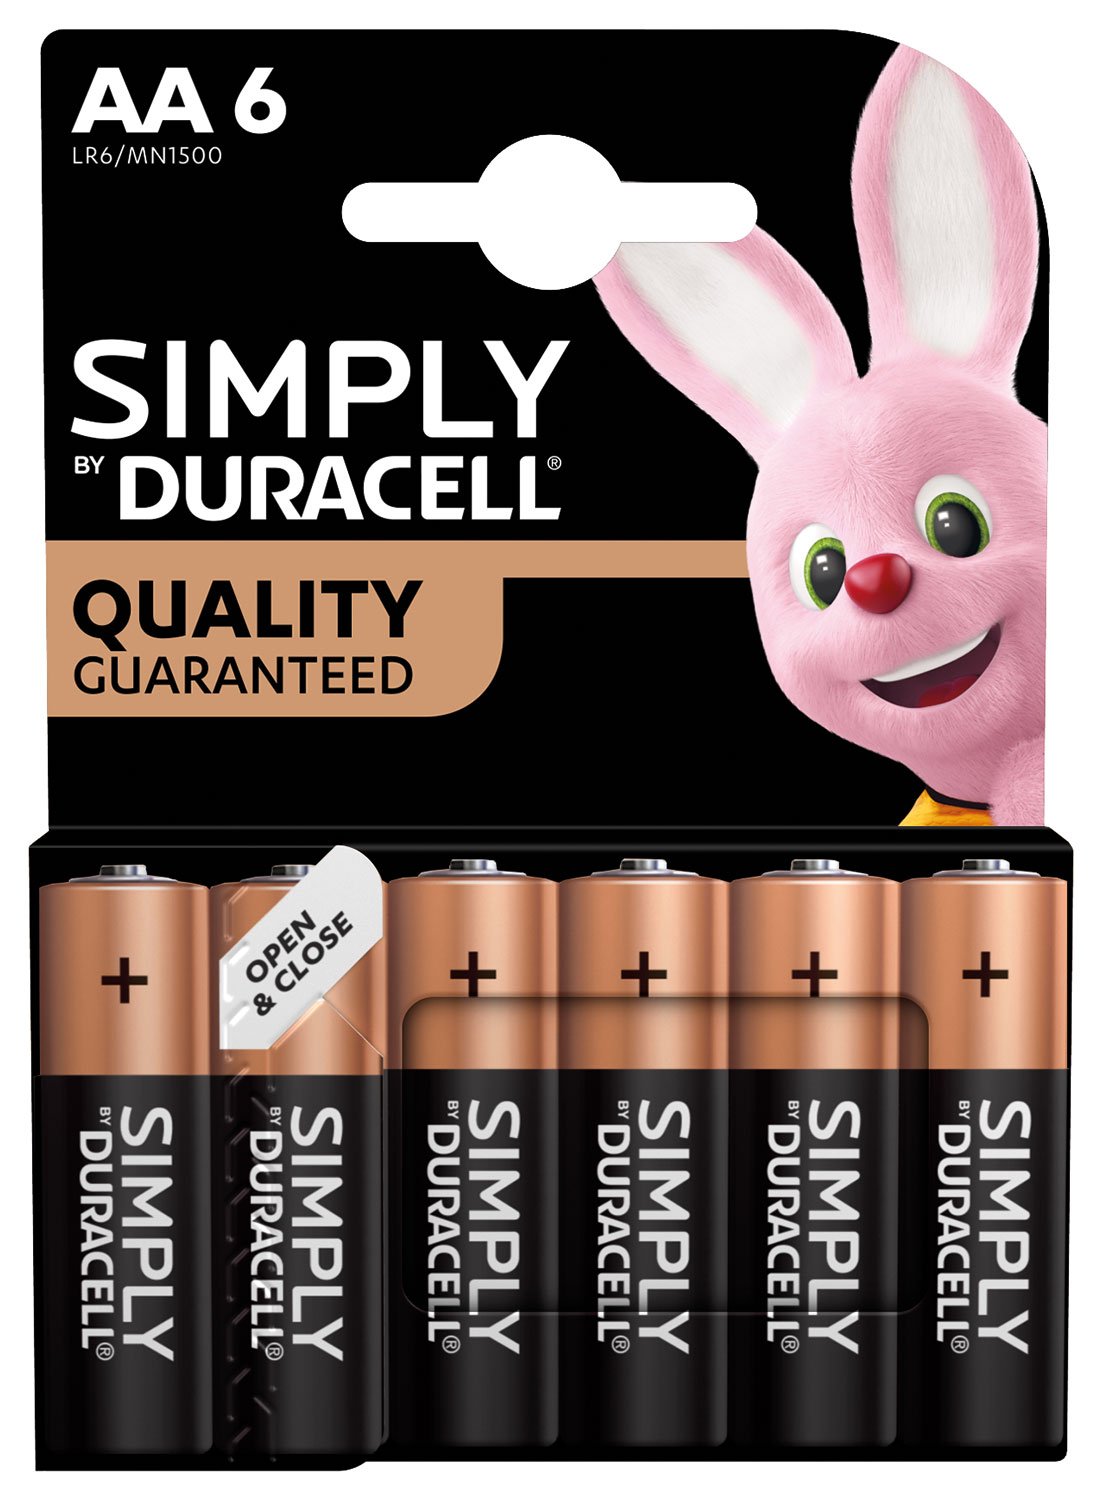 Simply Duracell Alkaline Batteries AA Simply Duracell Alkaline Batteries 6 Pack